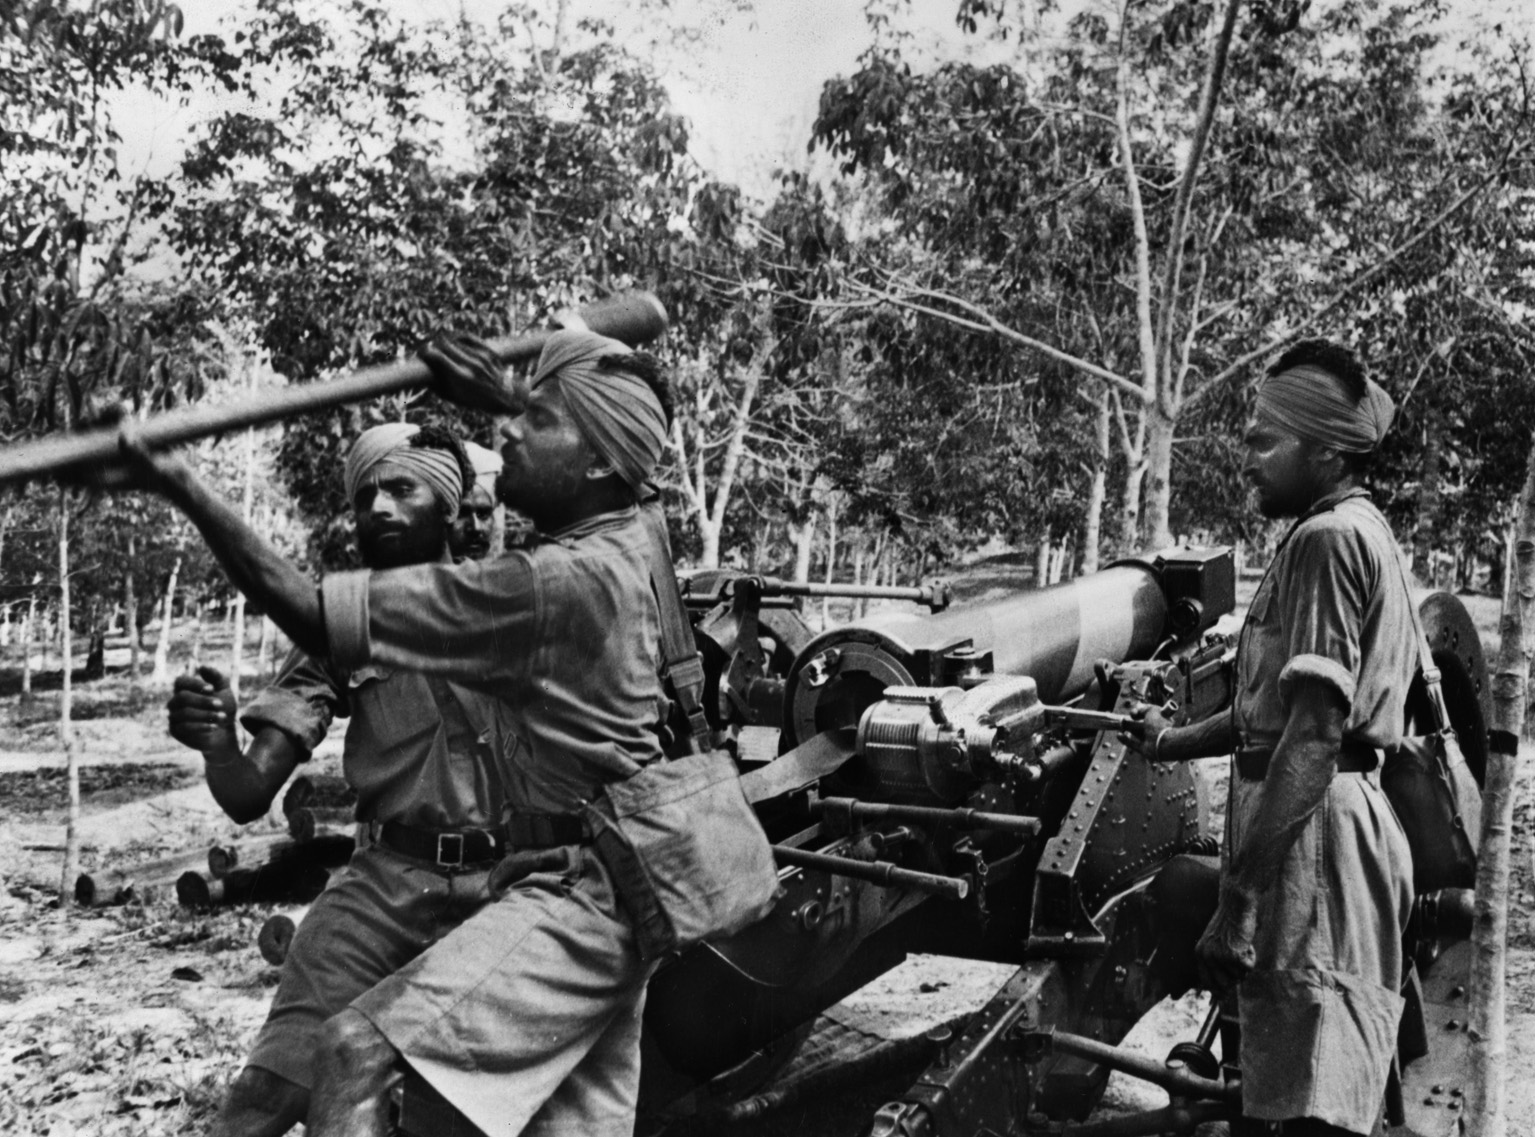 Soldiers from other parts of the British Empire defended Singapore. Here, Sikh soldiers train with an artillery piece in late 1941. They would be overrun by the Japanese.